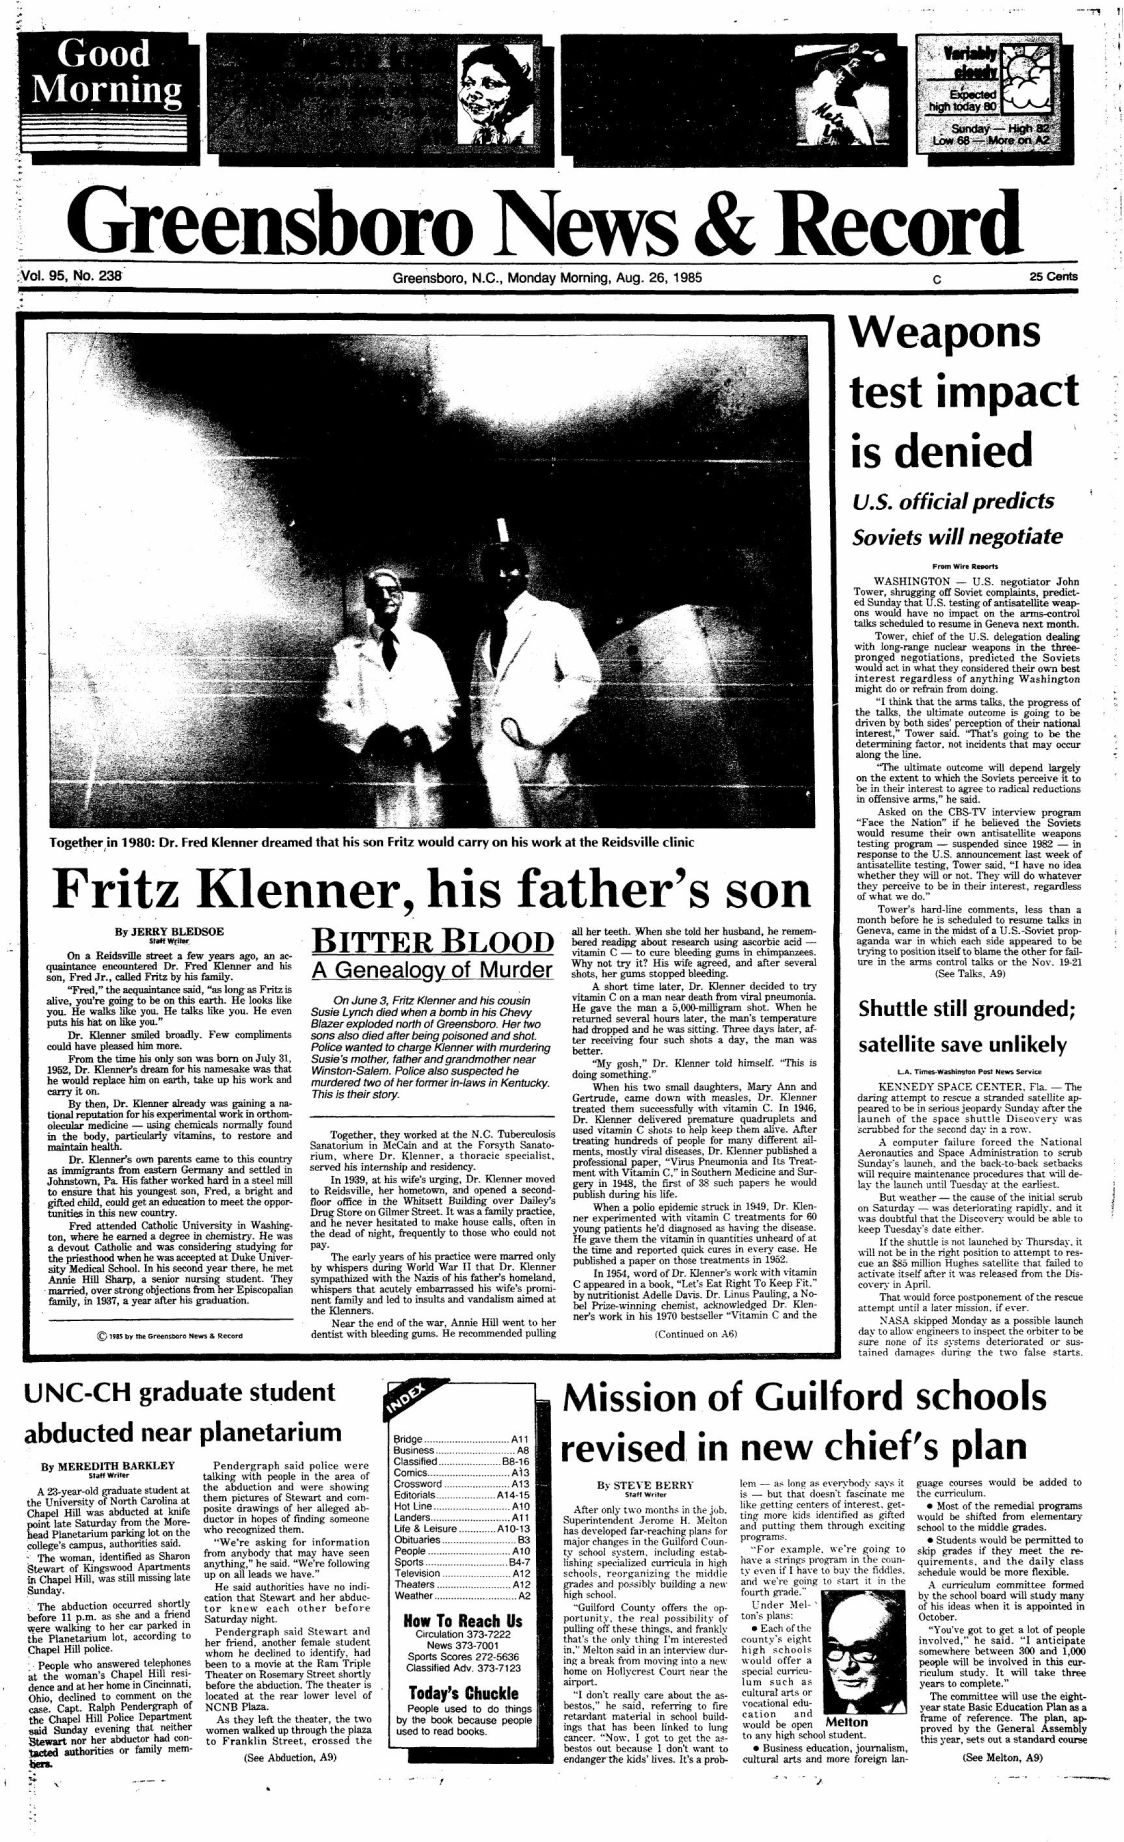 Bitter Blood: Fritz Klenner, his father's son | | greensboro.com1124 x 1842